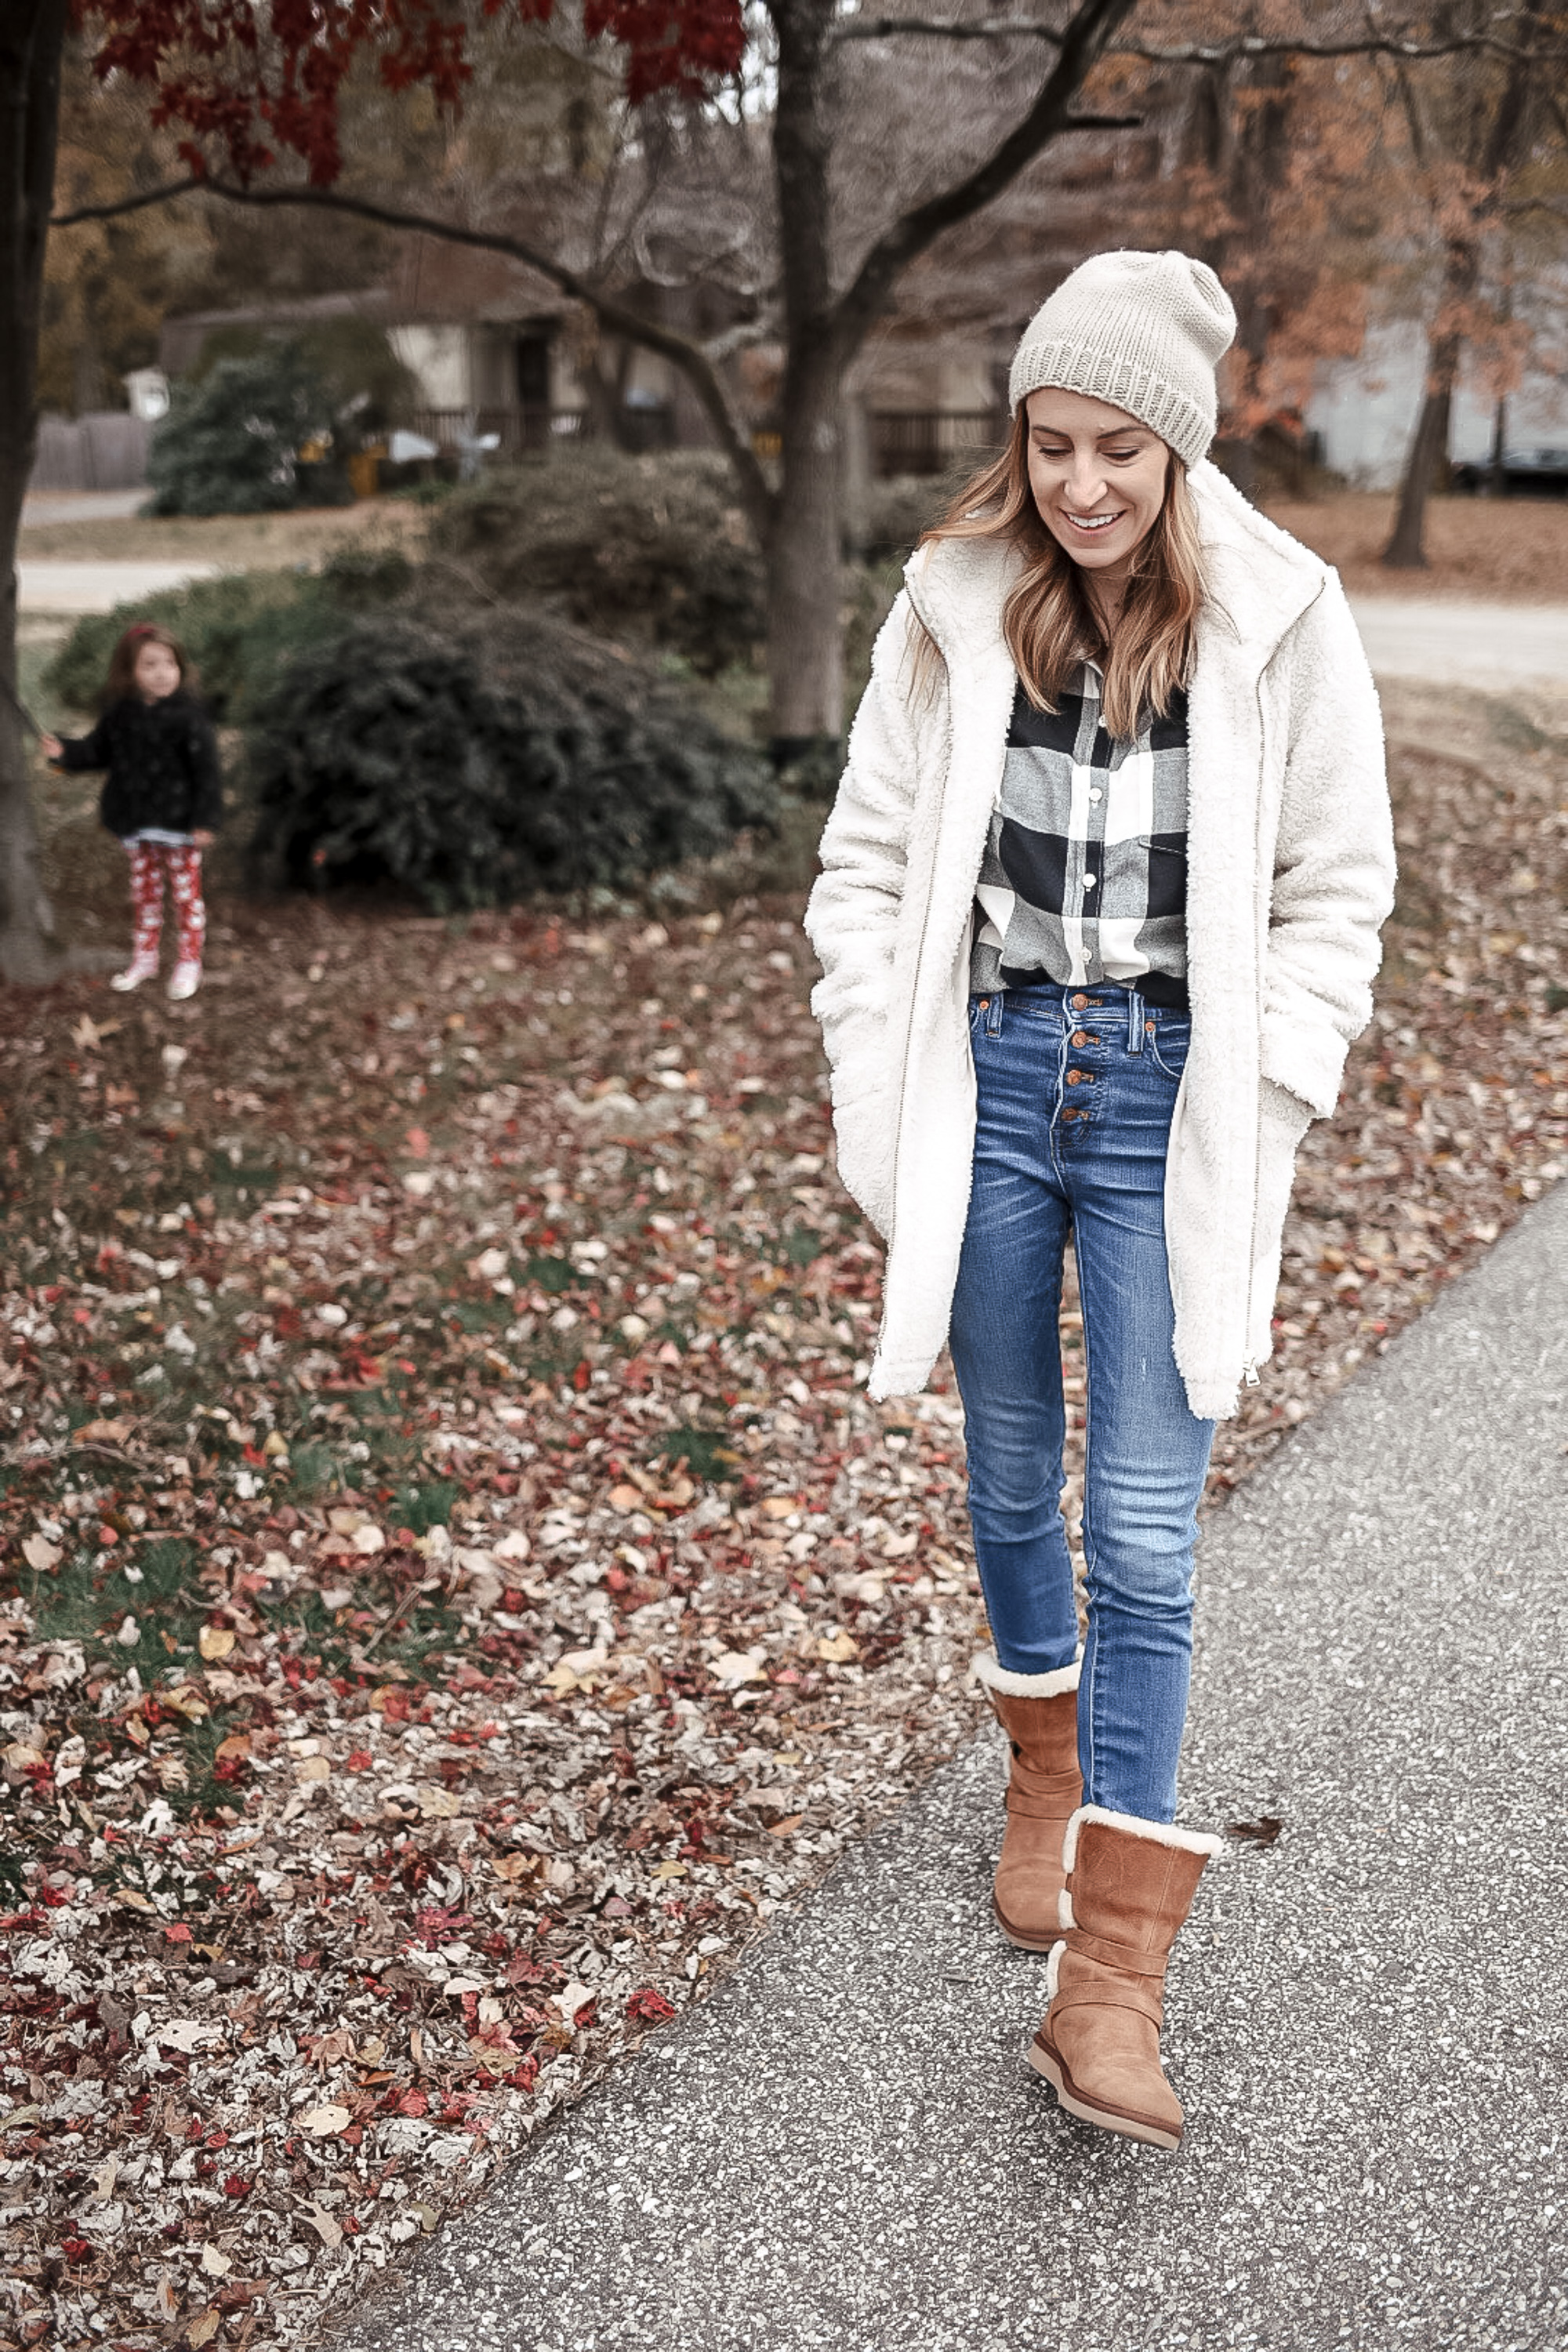 Winter Wardrobe Essentials For Moms - The Mama Notes